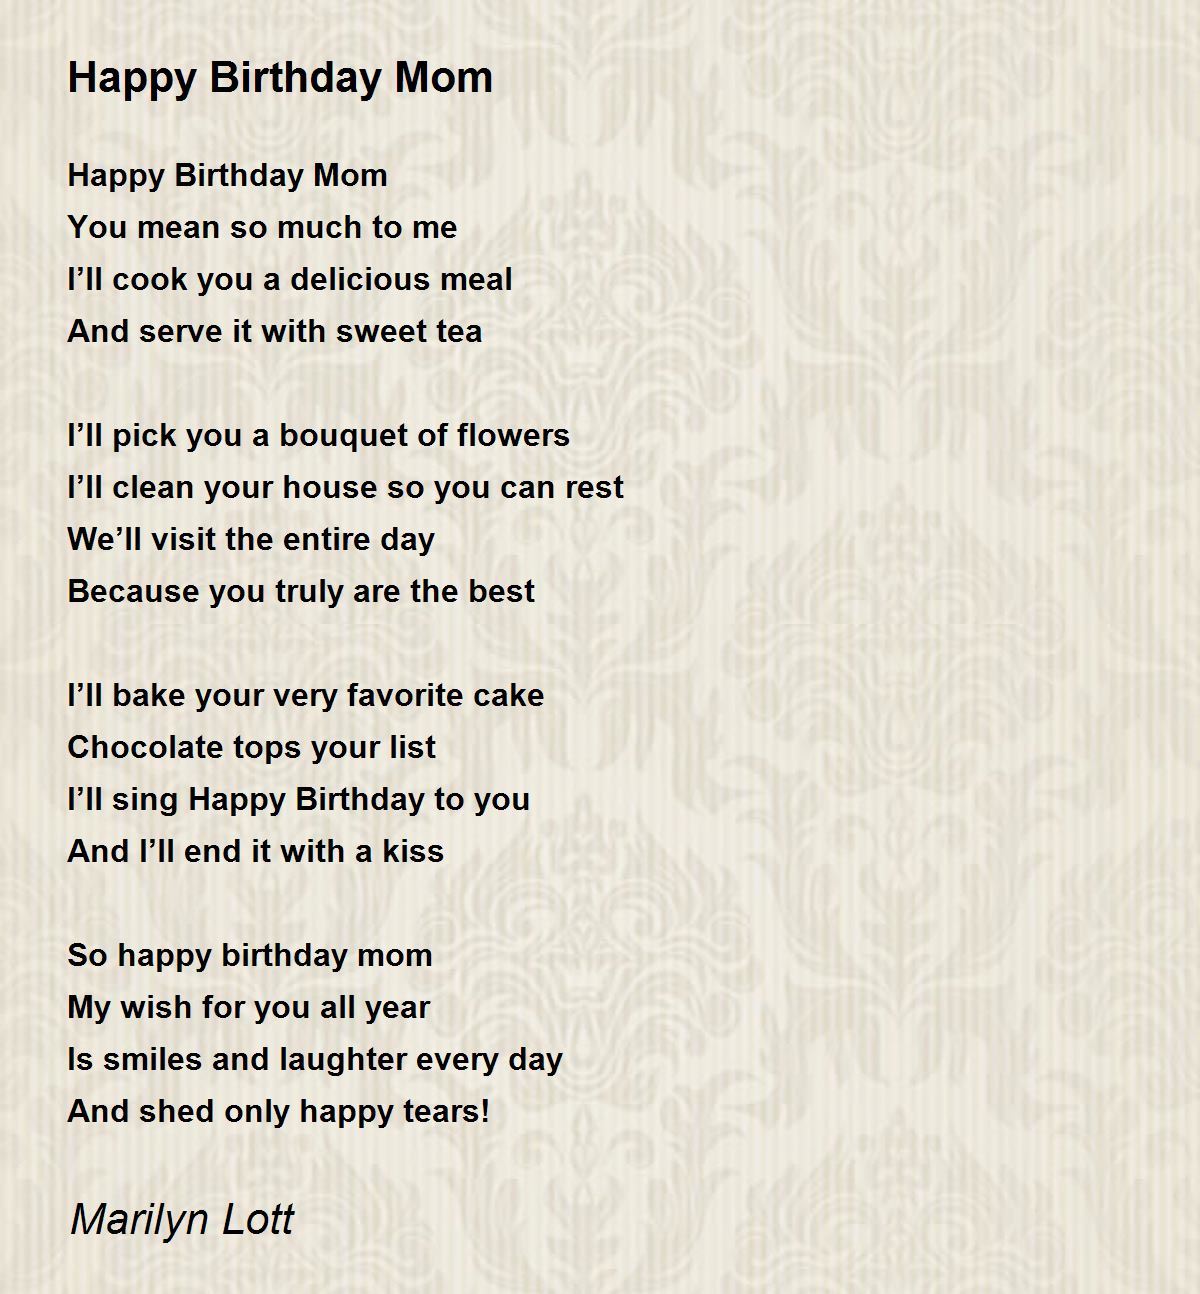 essay about my mother birthday